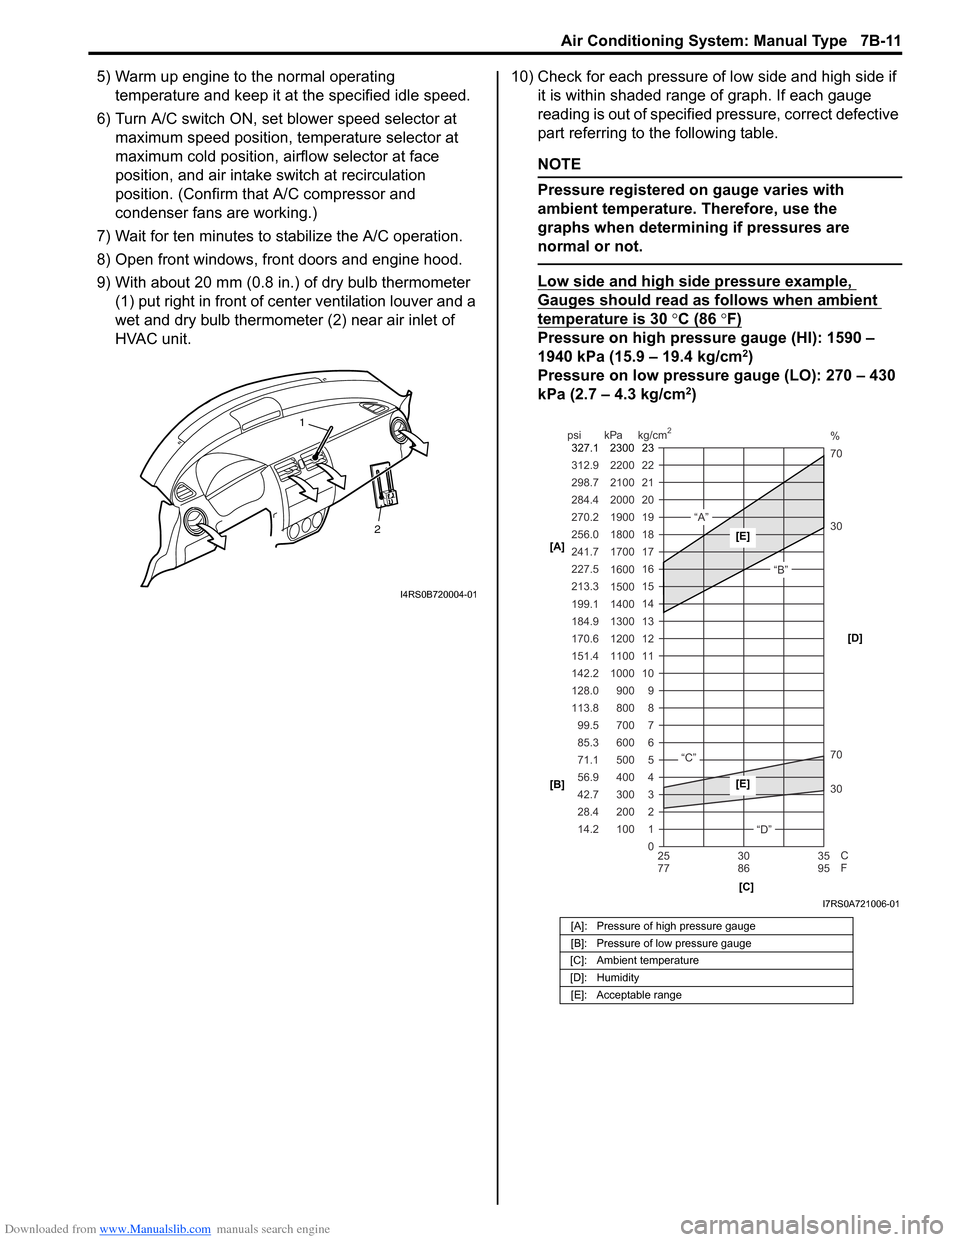 SUZUKI SWIFT 2008 2.G Service Workshop Manual Downloaded from www.Manualslib.com manuals search engine Air Conditioning System: Manual Type 7B-11
5) Warm up engine to the normal operating temperature and keep it at the specified idle speed.
6) Tu